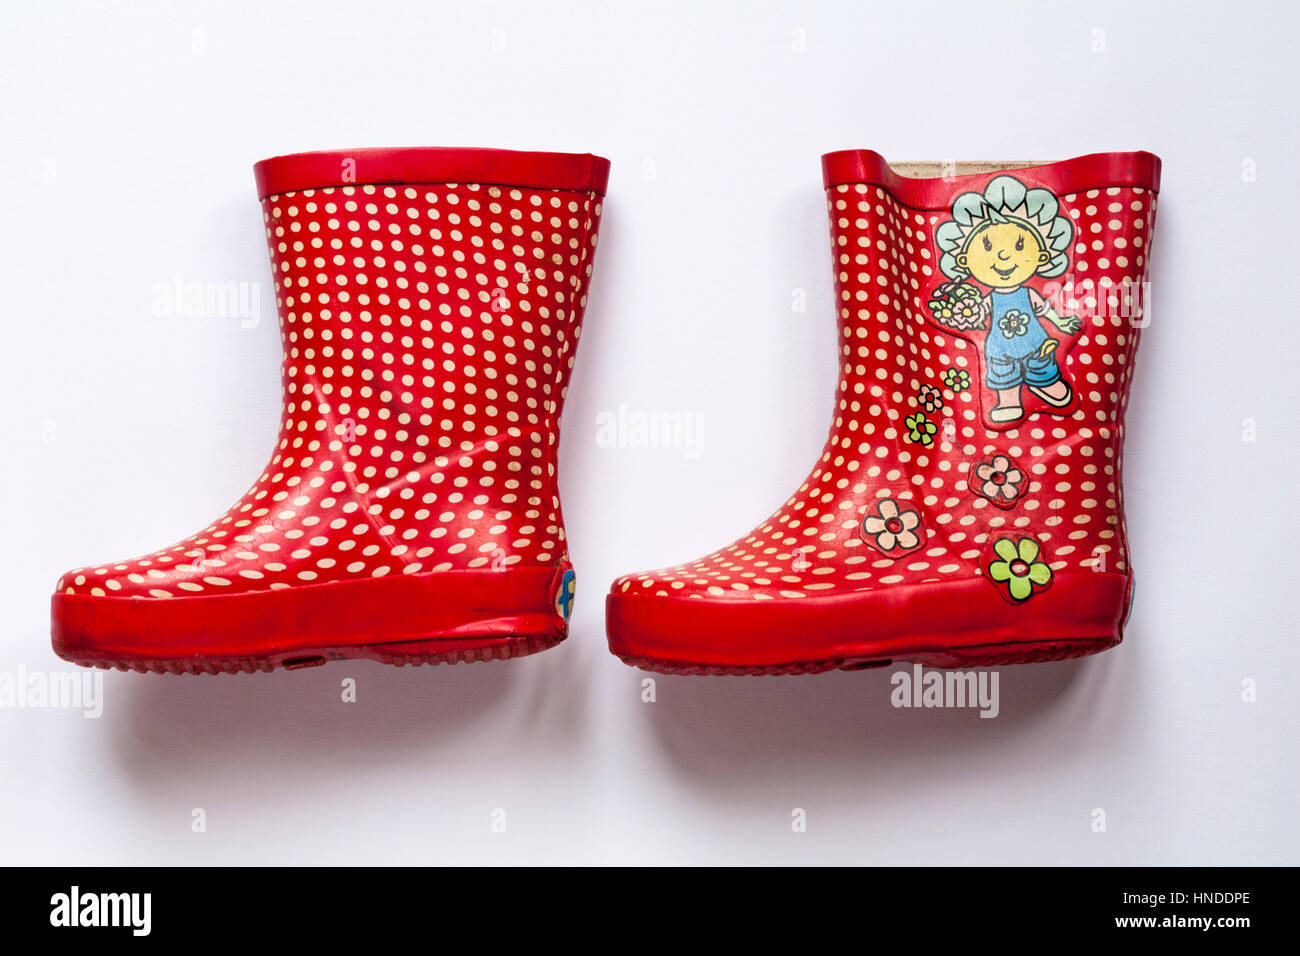 Well loved used pair of children's red polka dots wellie boots with fifi and the flowertots on  isolated on white background Stock Photo